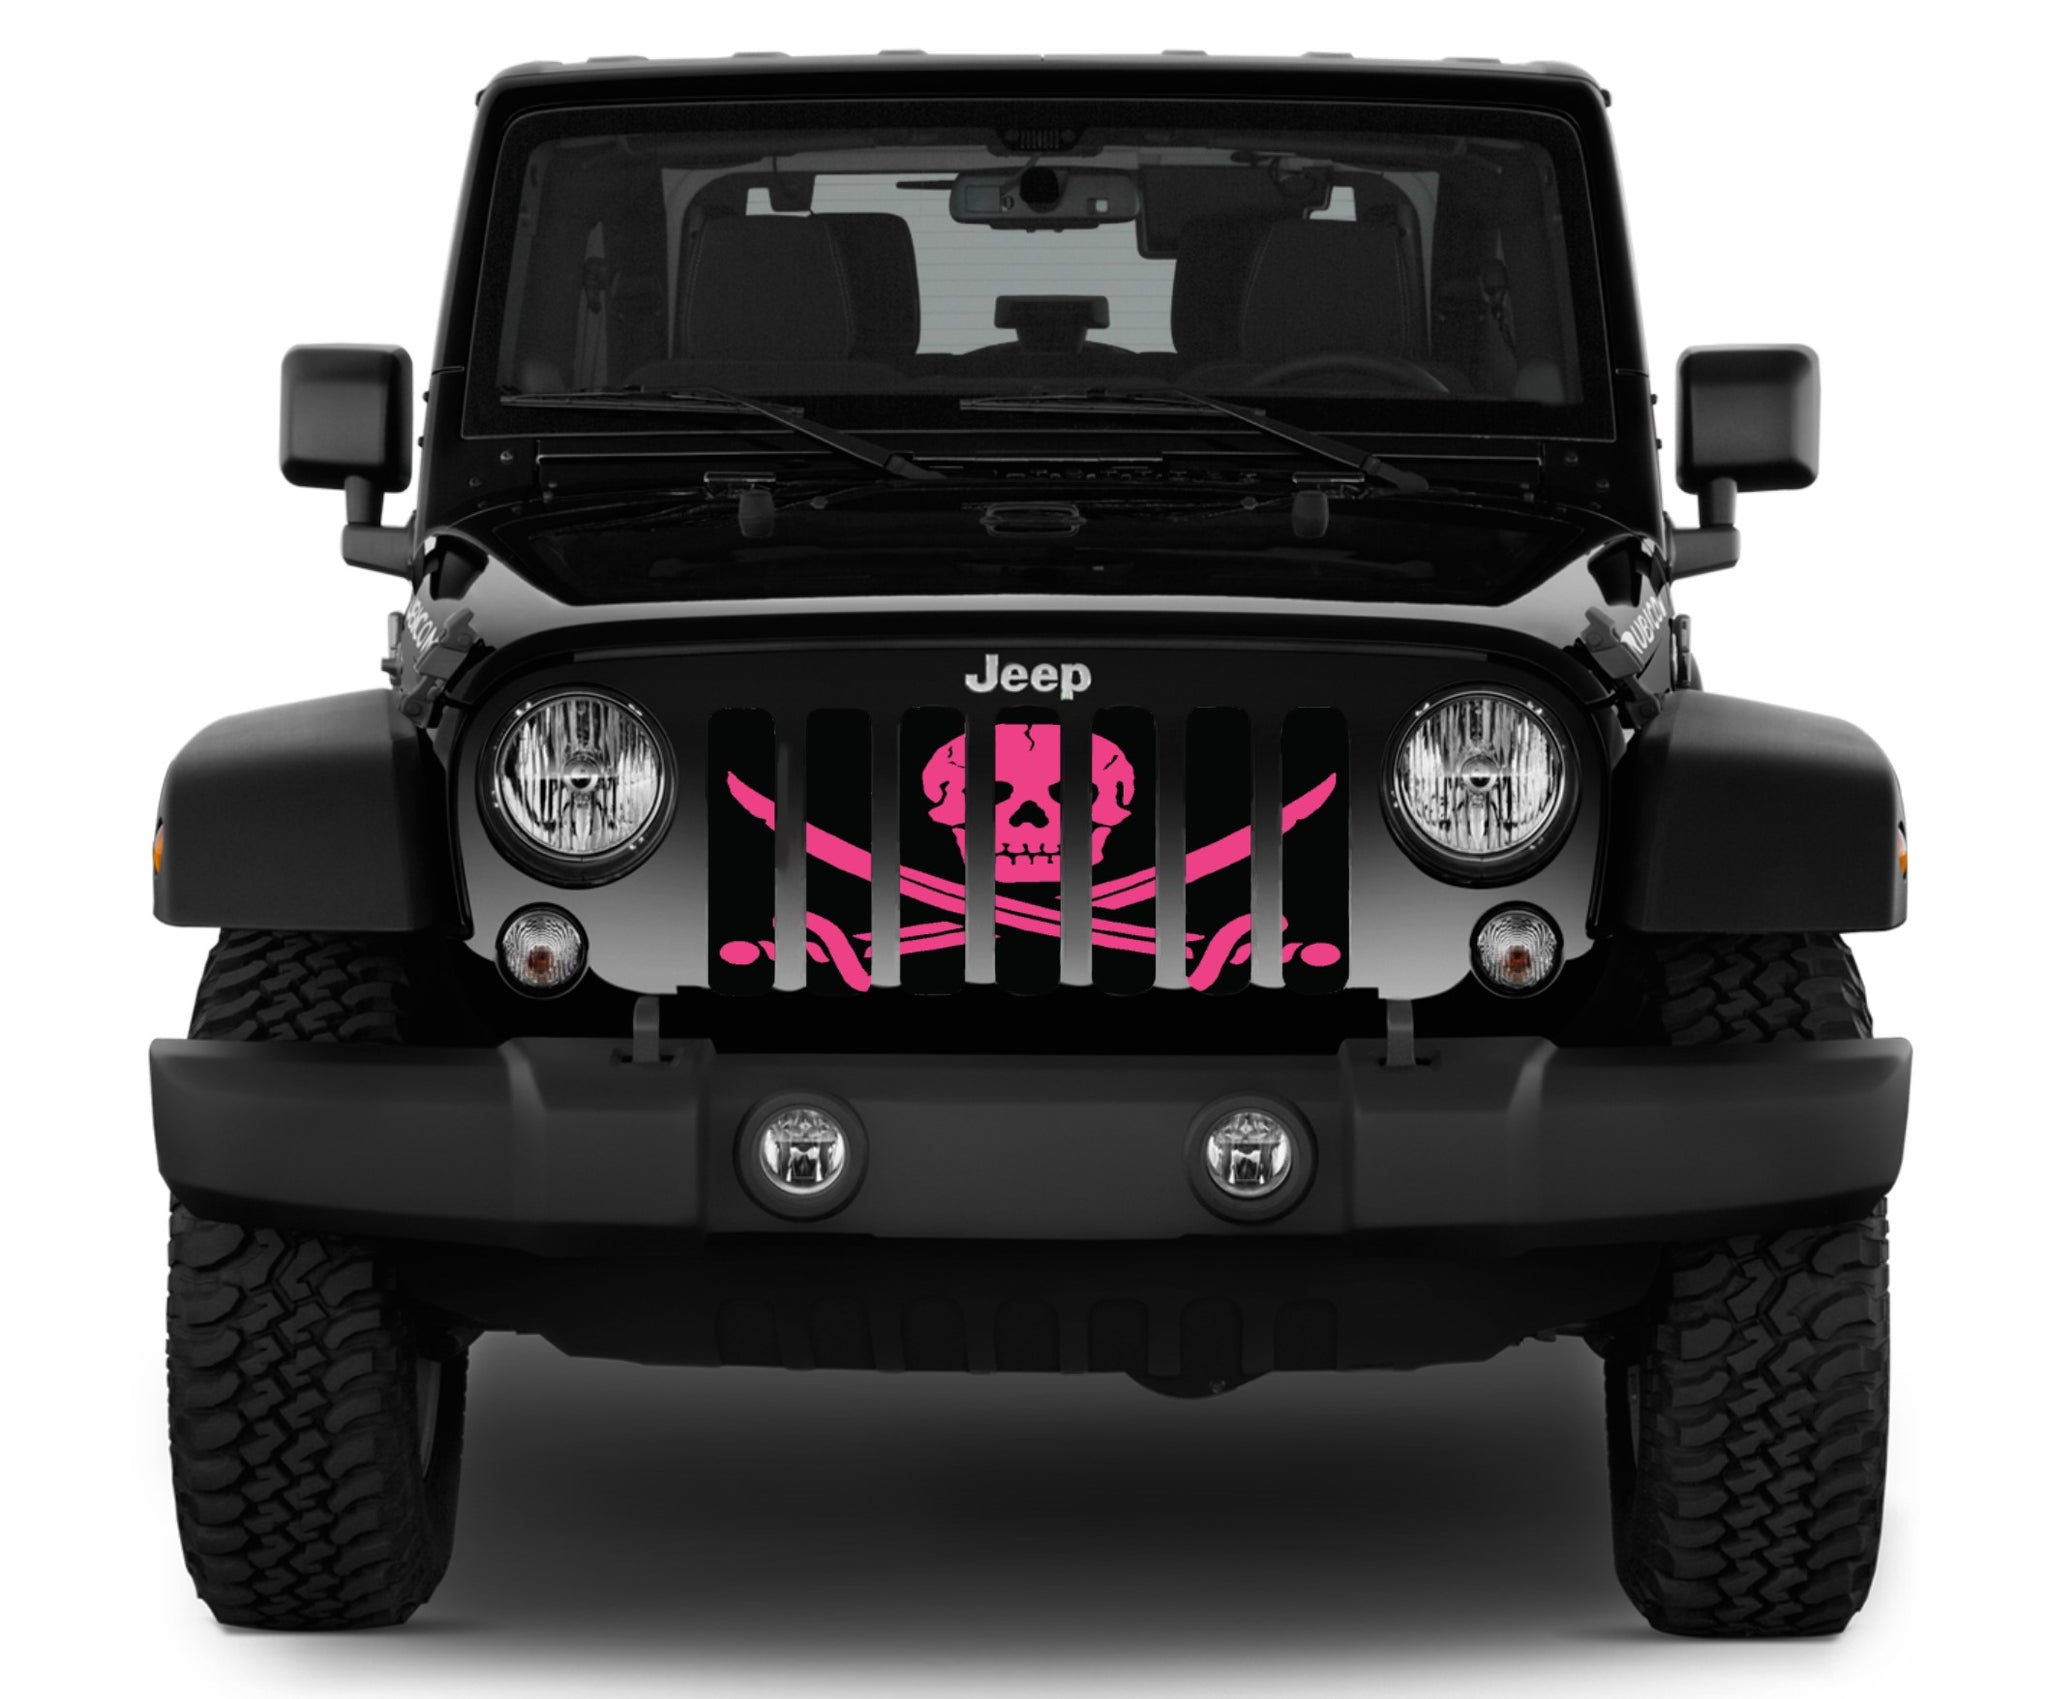 Jeep Wrangler Ahoy Matey Hot Pink Pirate Flag Grille Insert | Dirty Acres